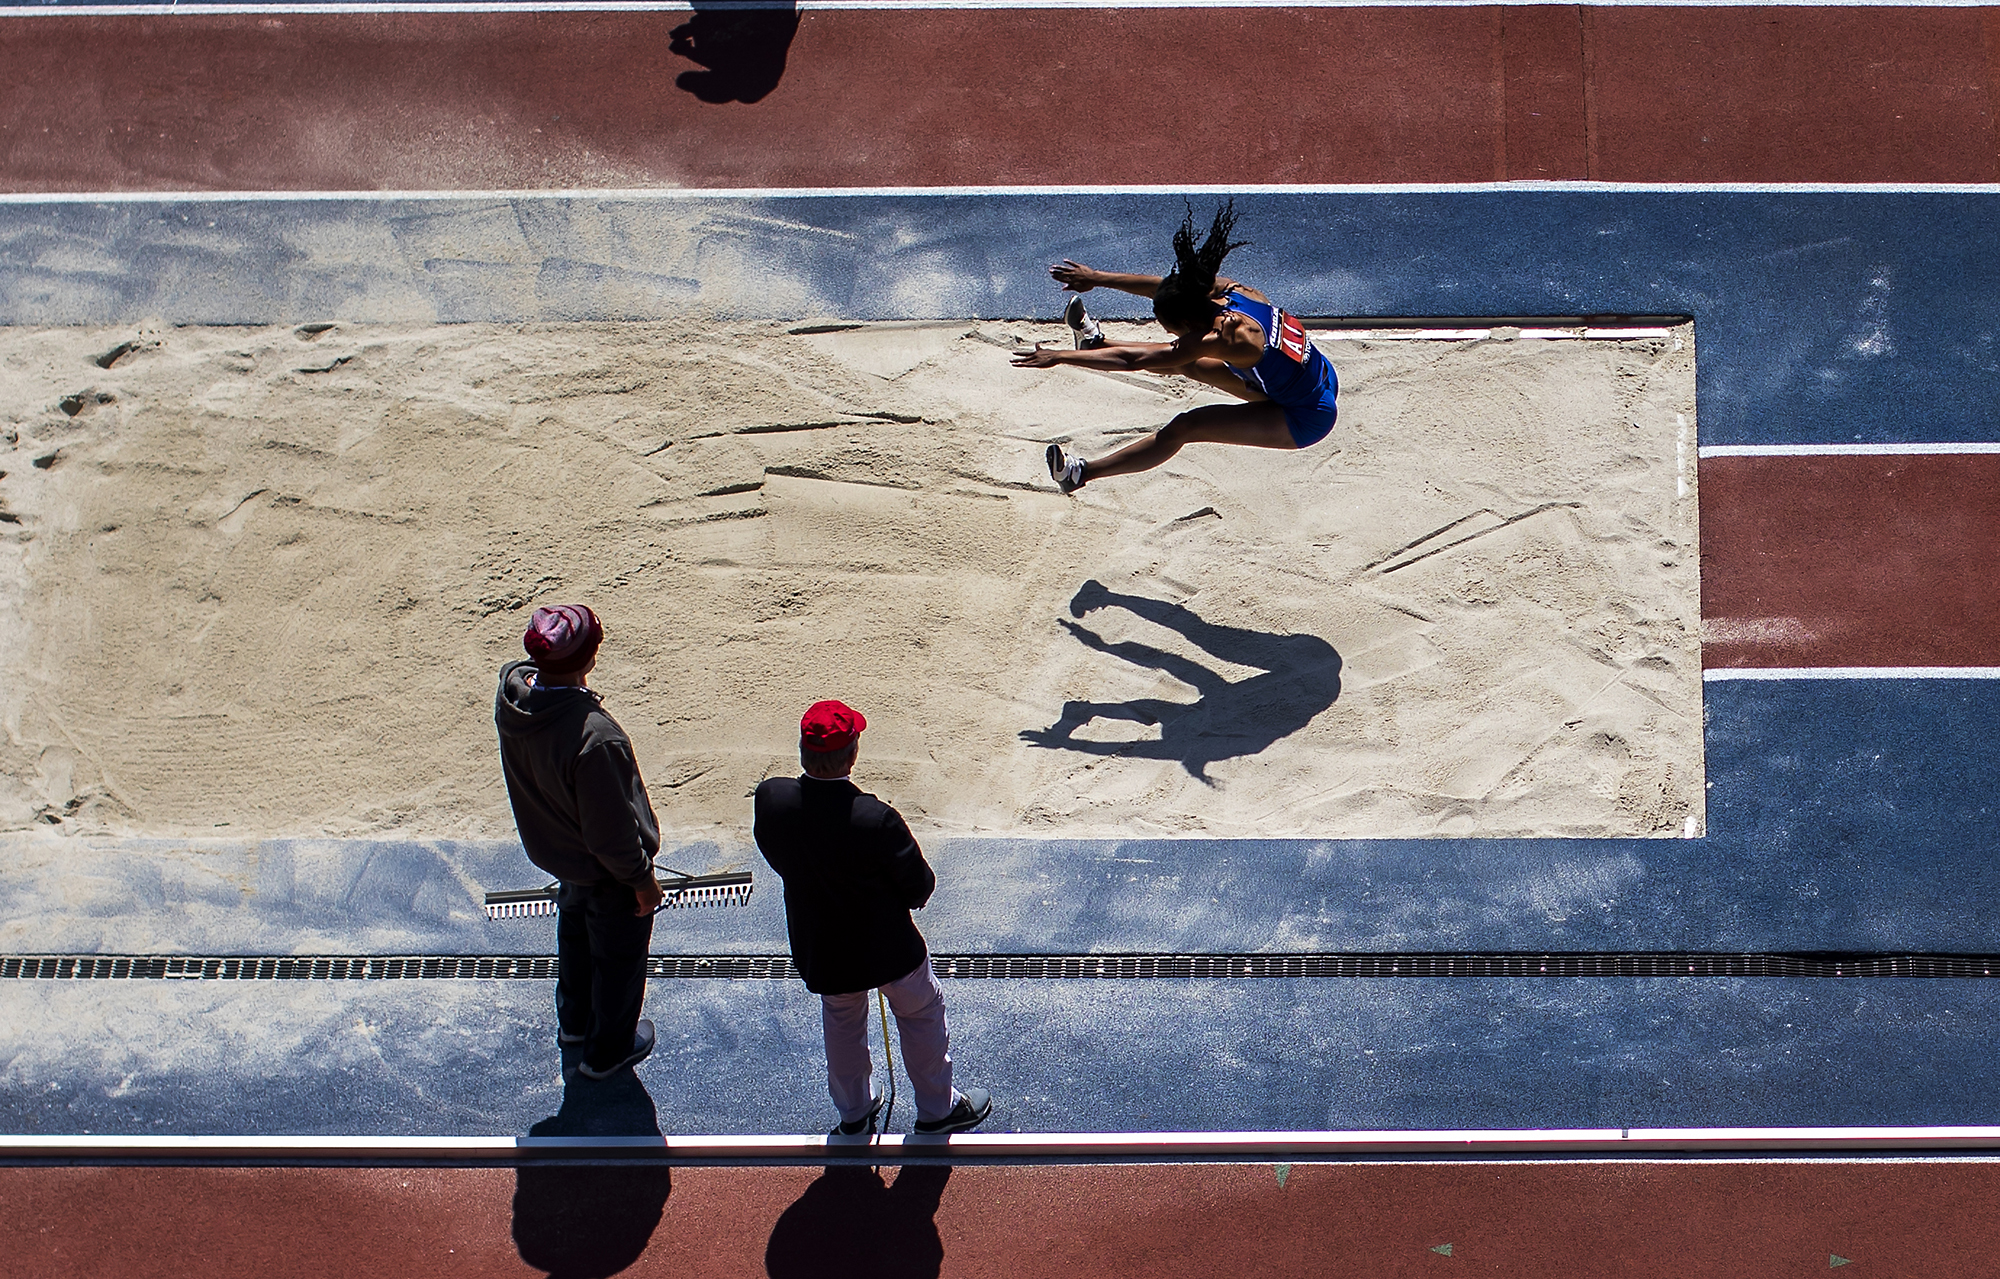 Overhead view of a person in mid-jump competing in a long jump.